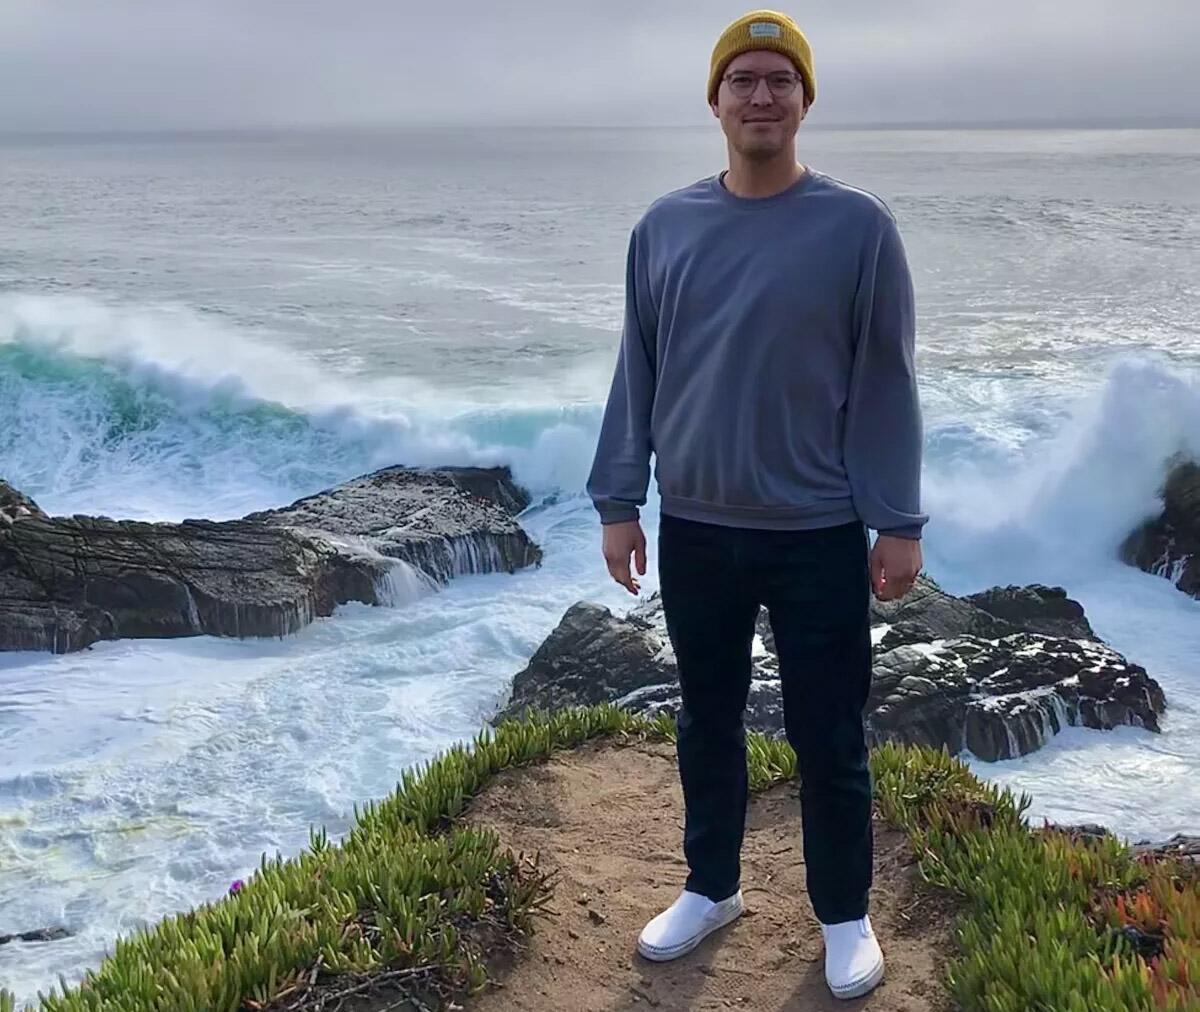 A man in a beanie and glasses stands next to the ocean where waves are crashing onto rocks.